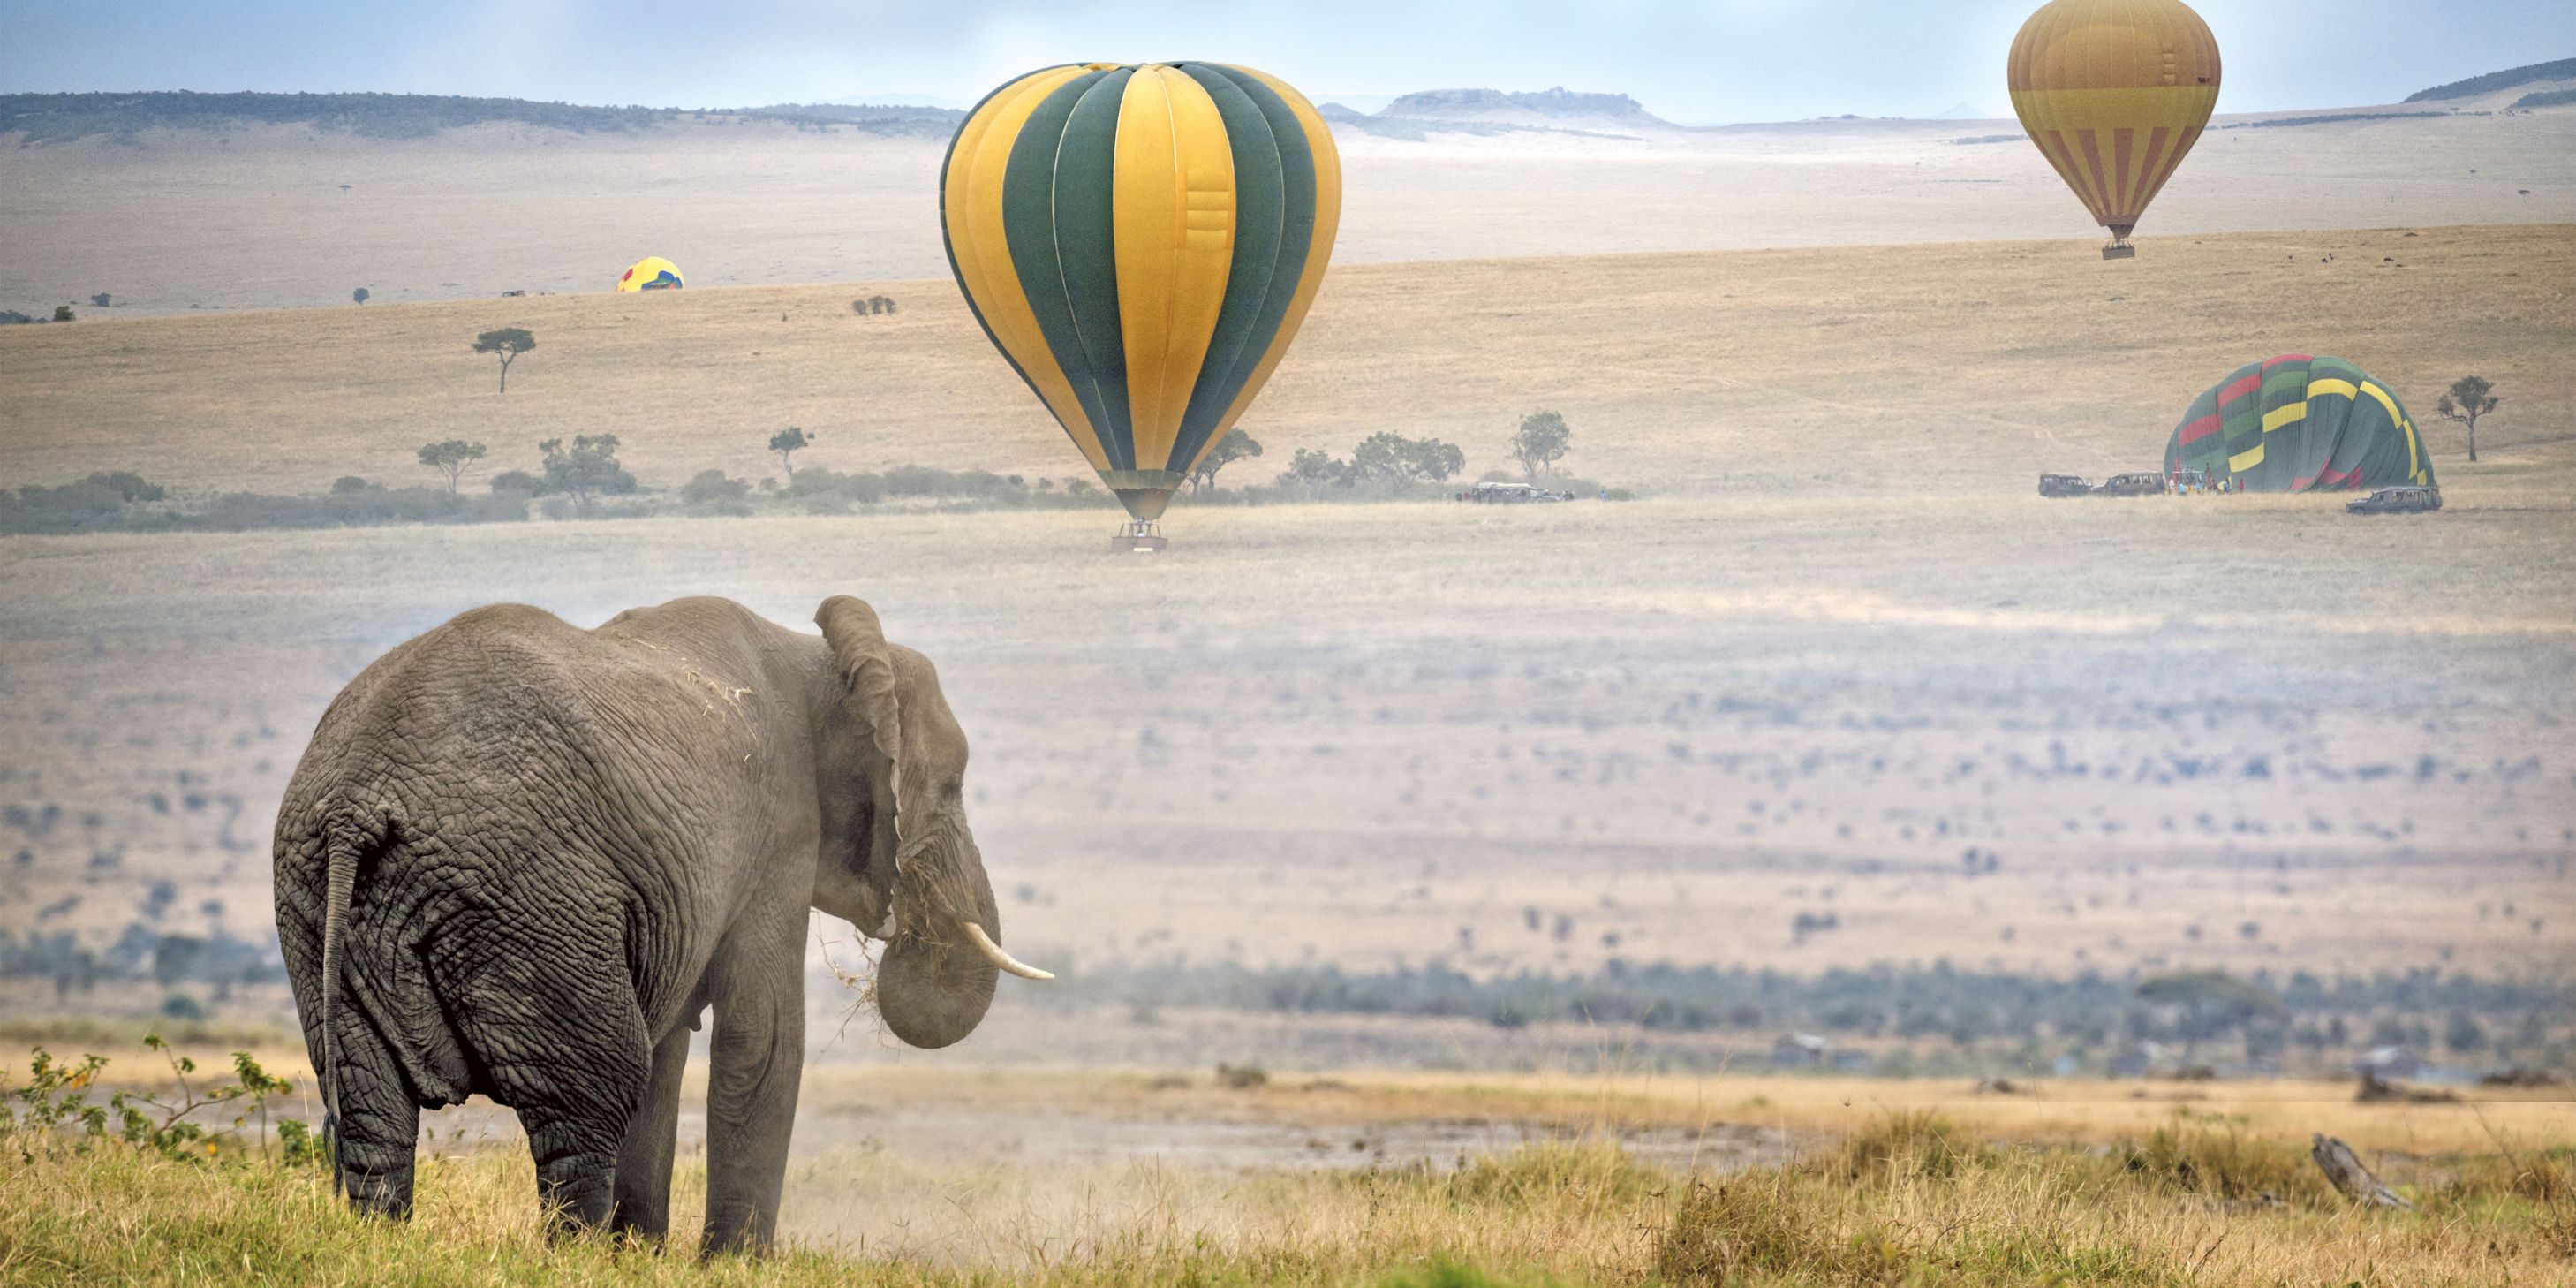 Elephant in front of a field with hot air balloons